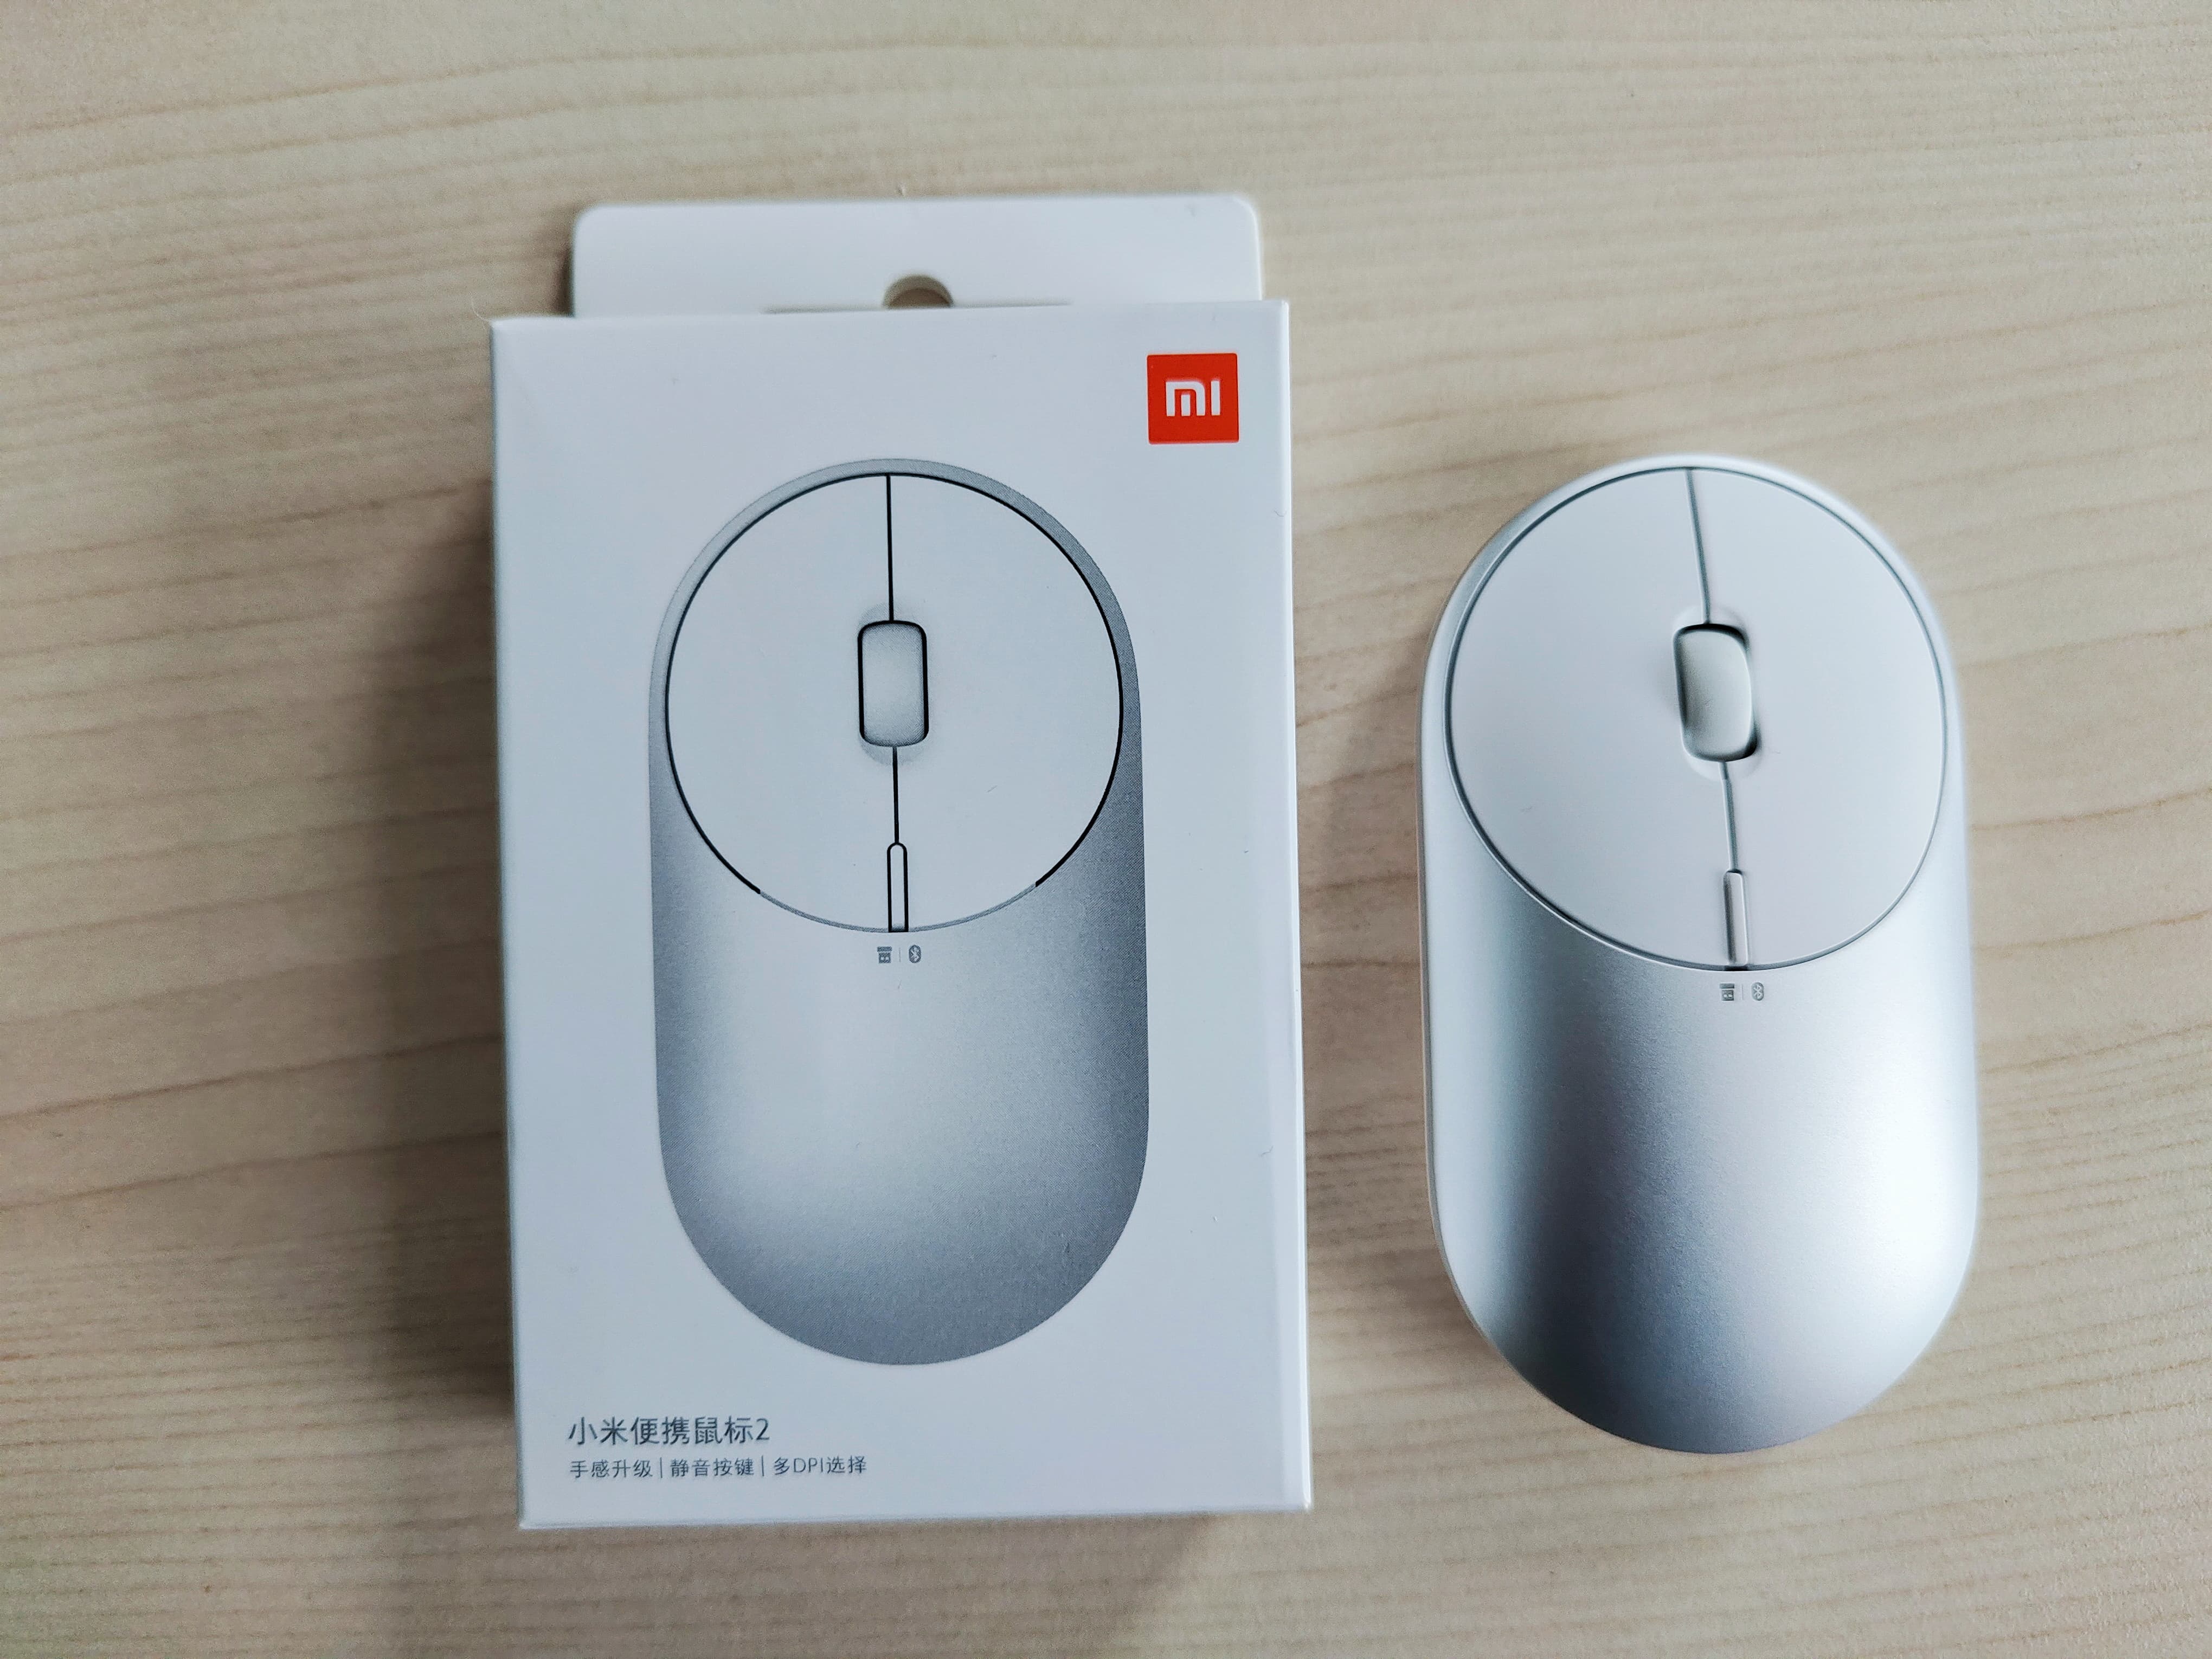 After 4 years, this product of Xiaomi has finally been updated